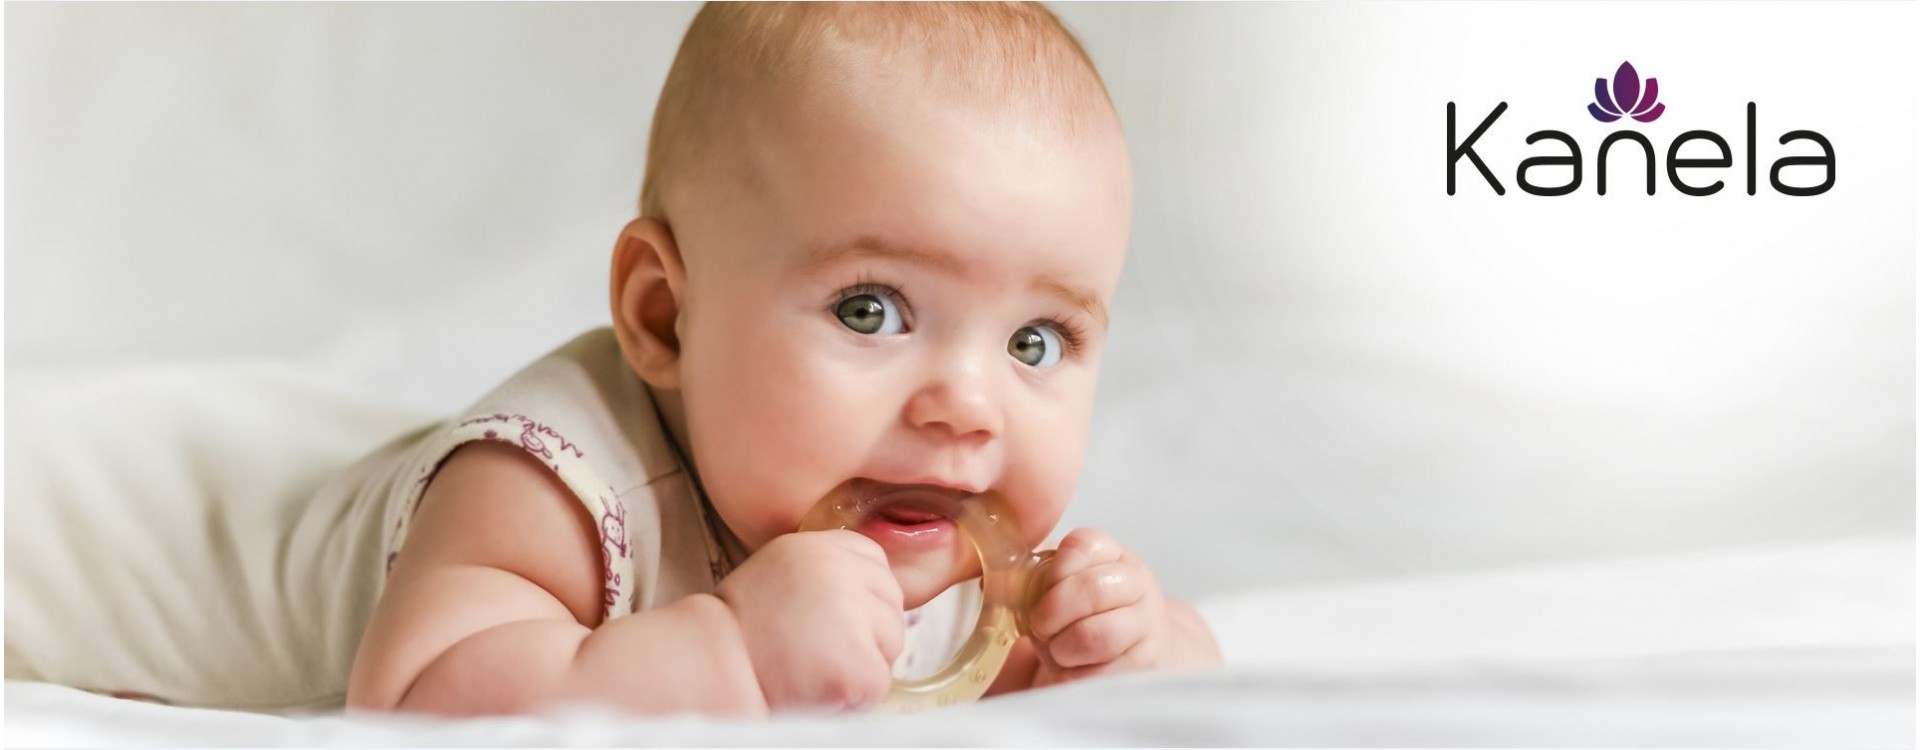 Help, my baby is teething - how can I help?